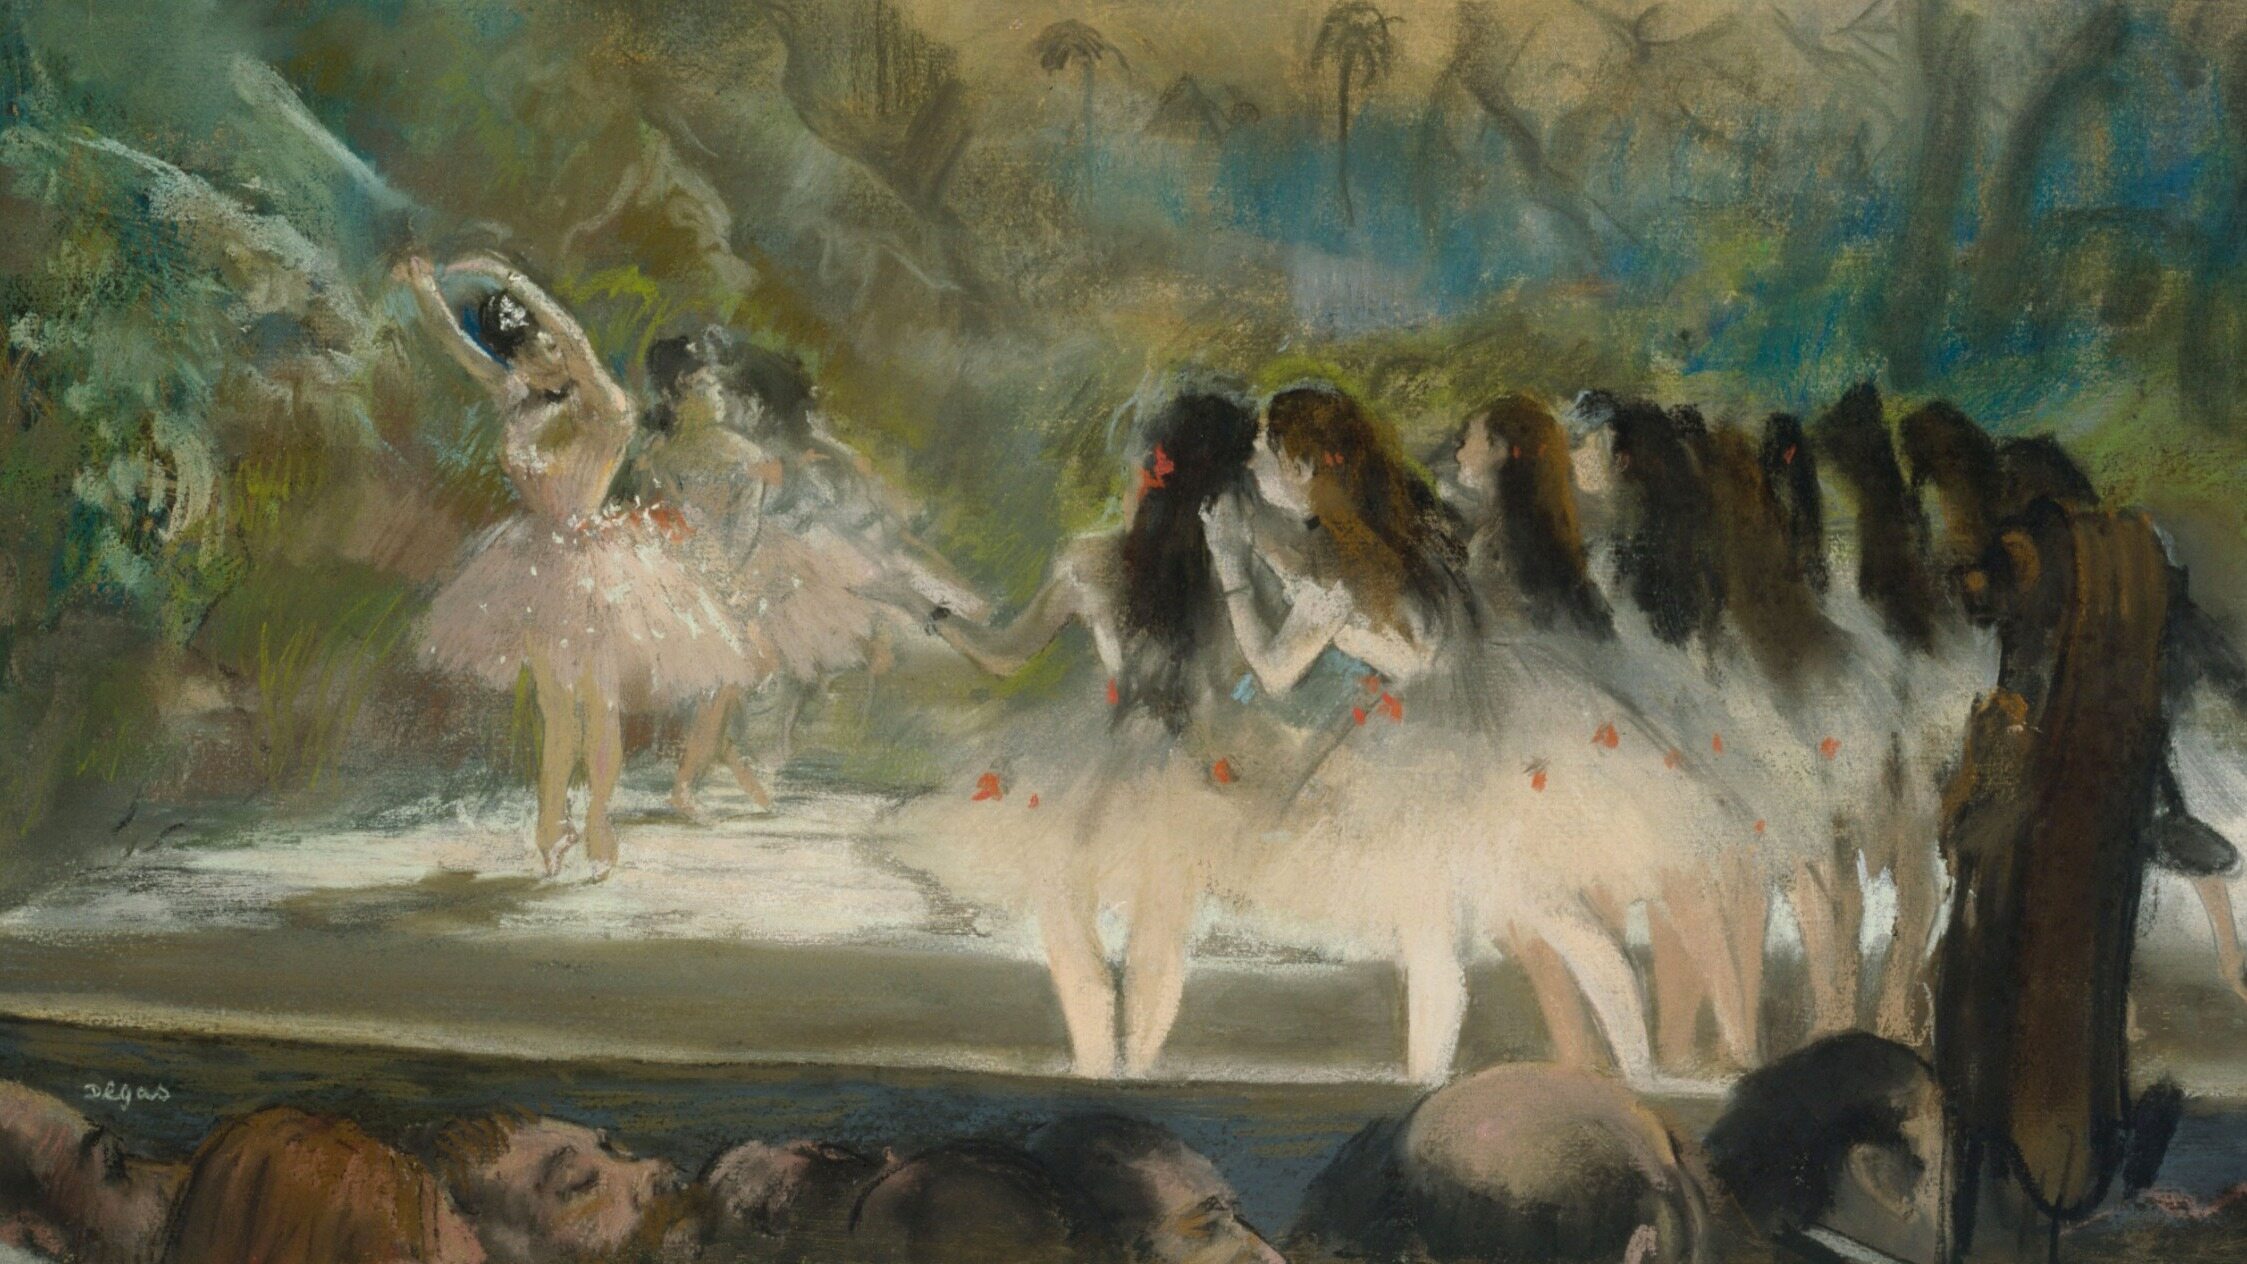 Degas, Bocelli, Wonder... Prof.  She hatched: if they were born today, we could treat their eyesight